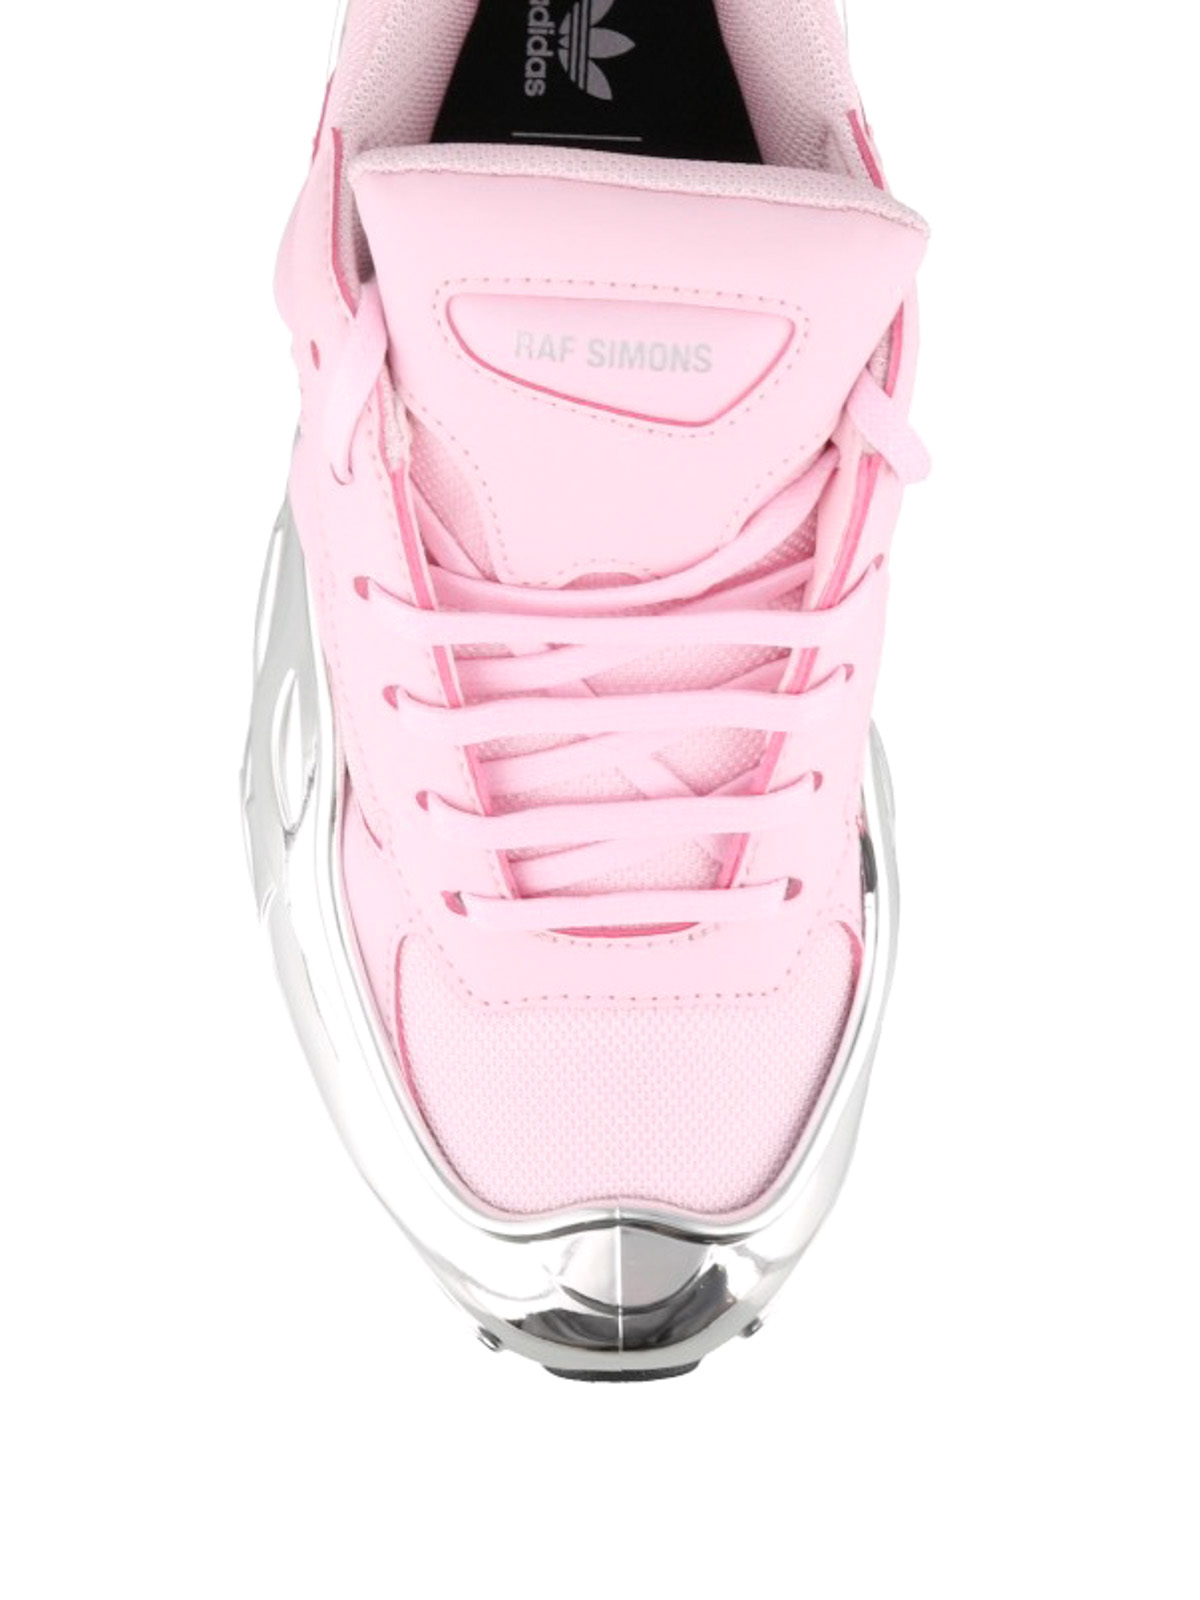 Trainers Raf Simons Adidas - Ozweego RS pink and silver chunky sneakers -  EE7947PINKSILVERSILVER